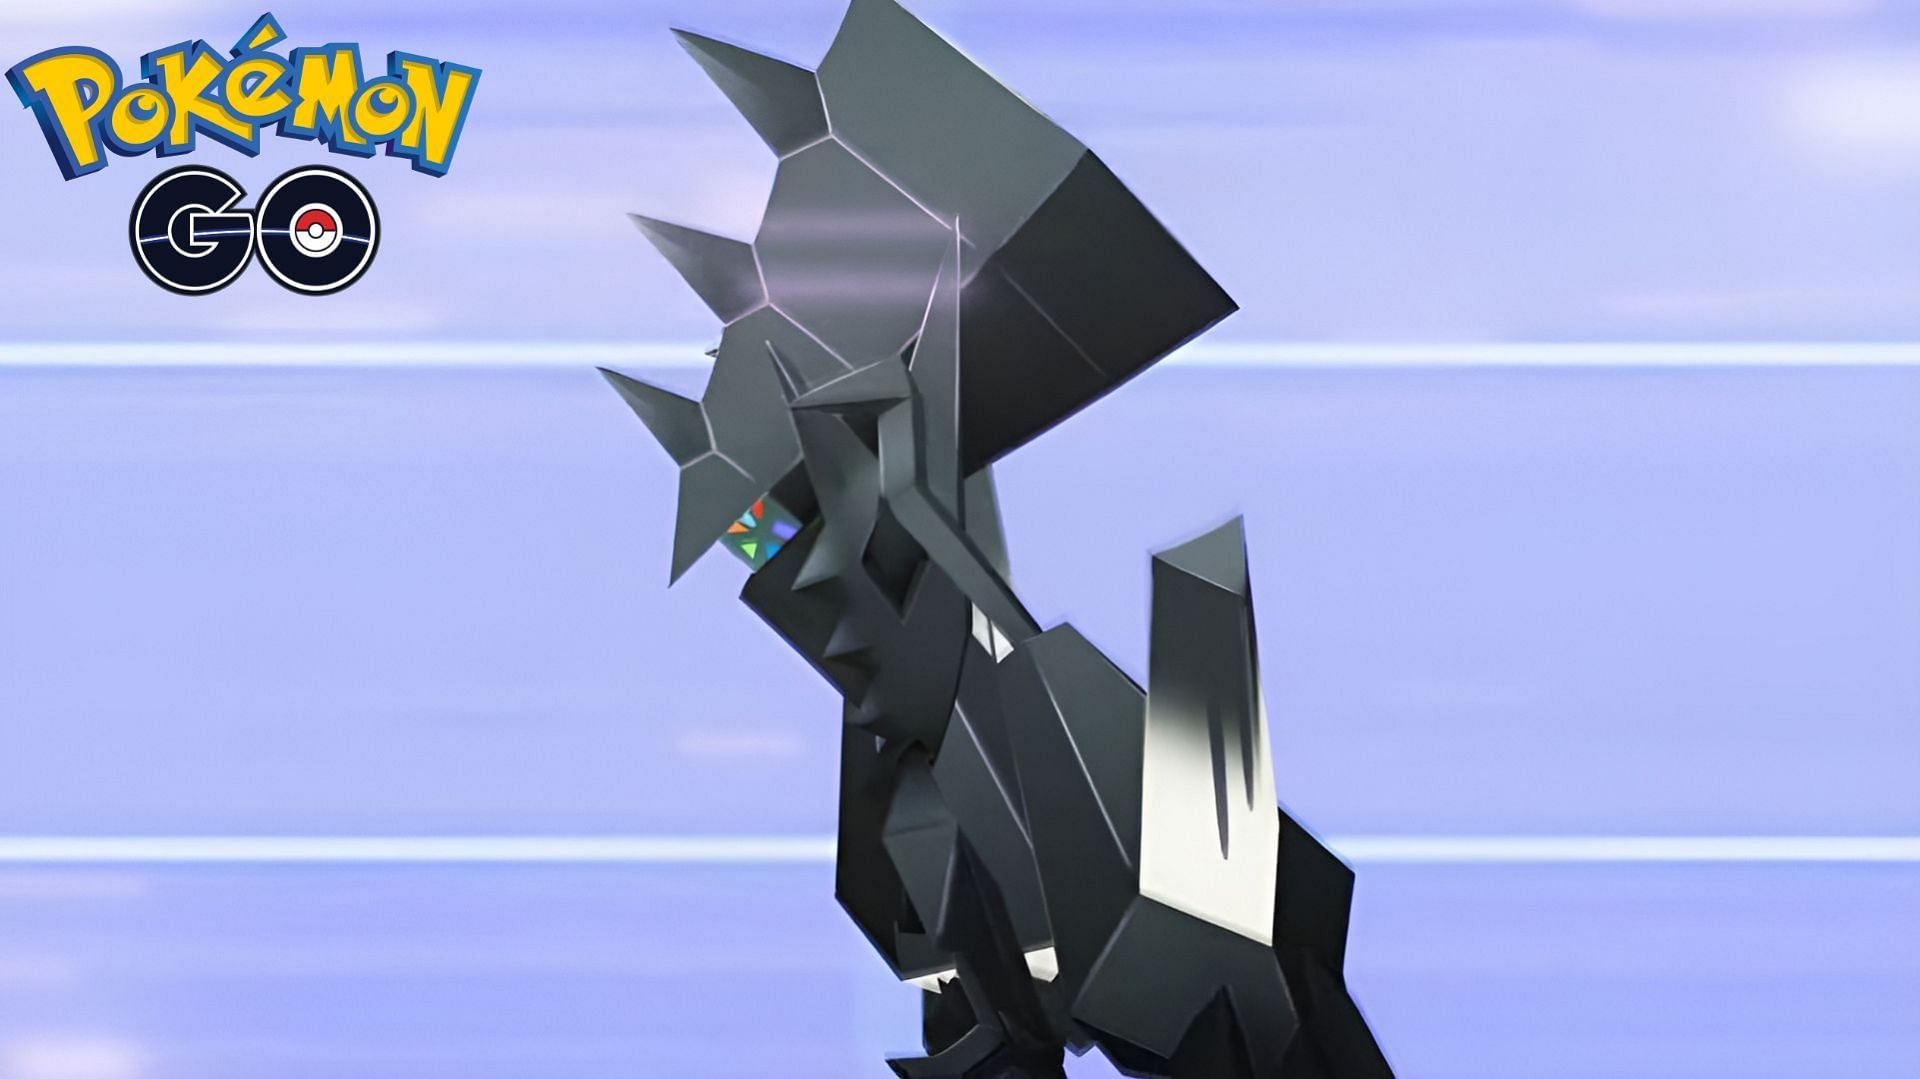 Reasons to be excited about Necrozma debut in Pokemon GO